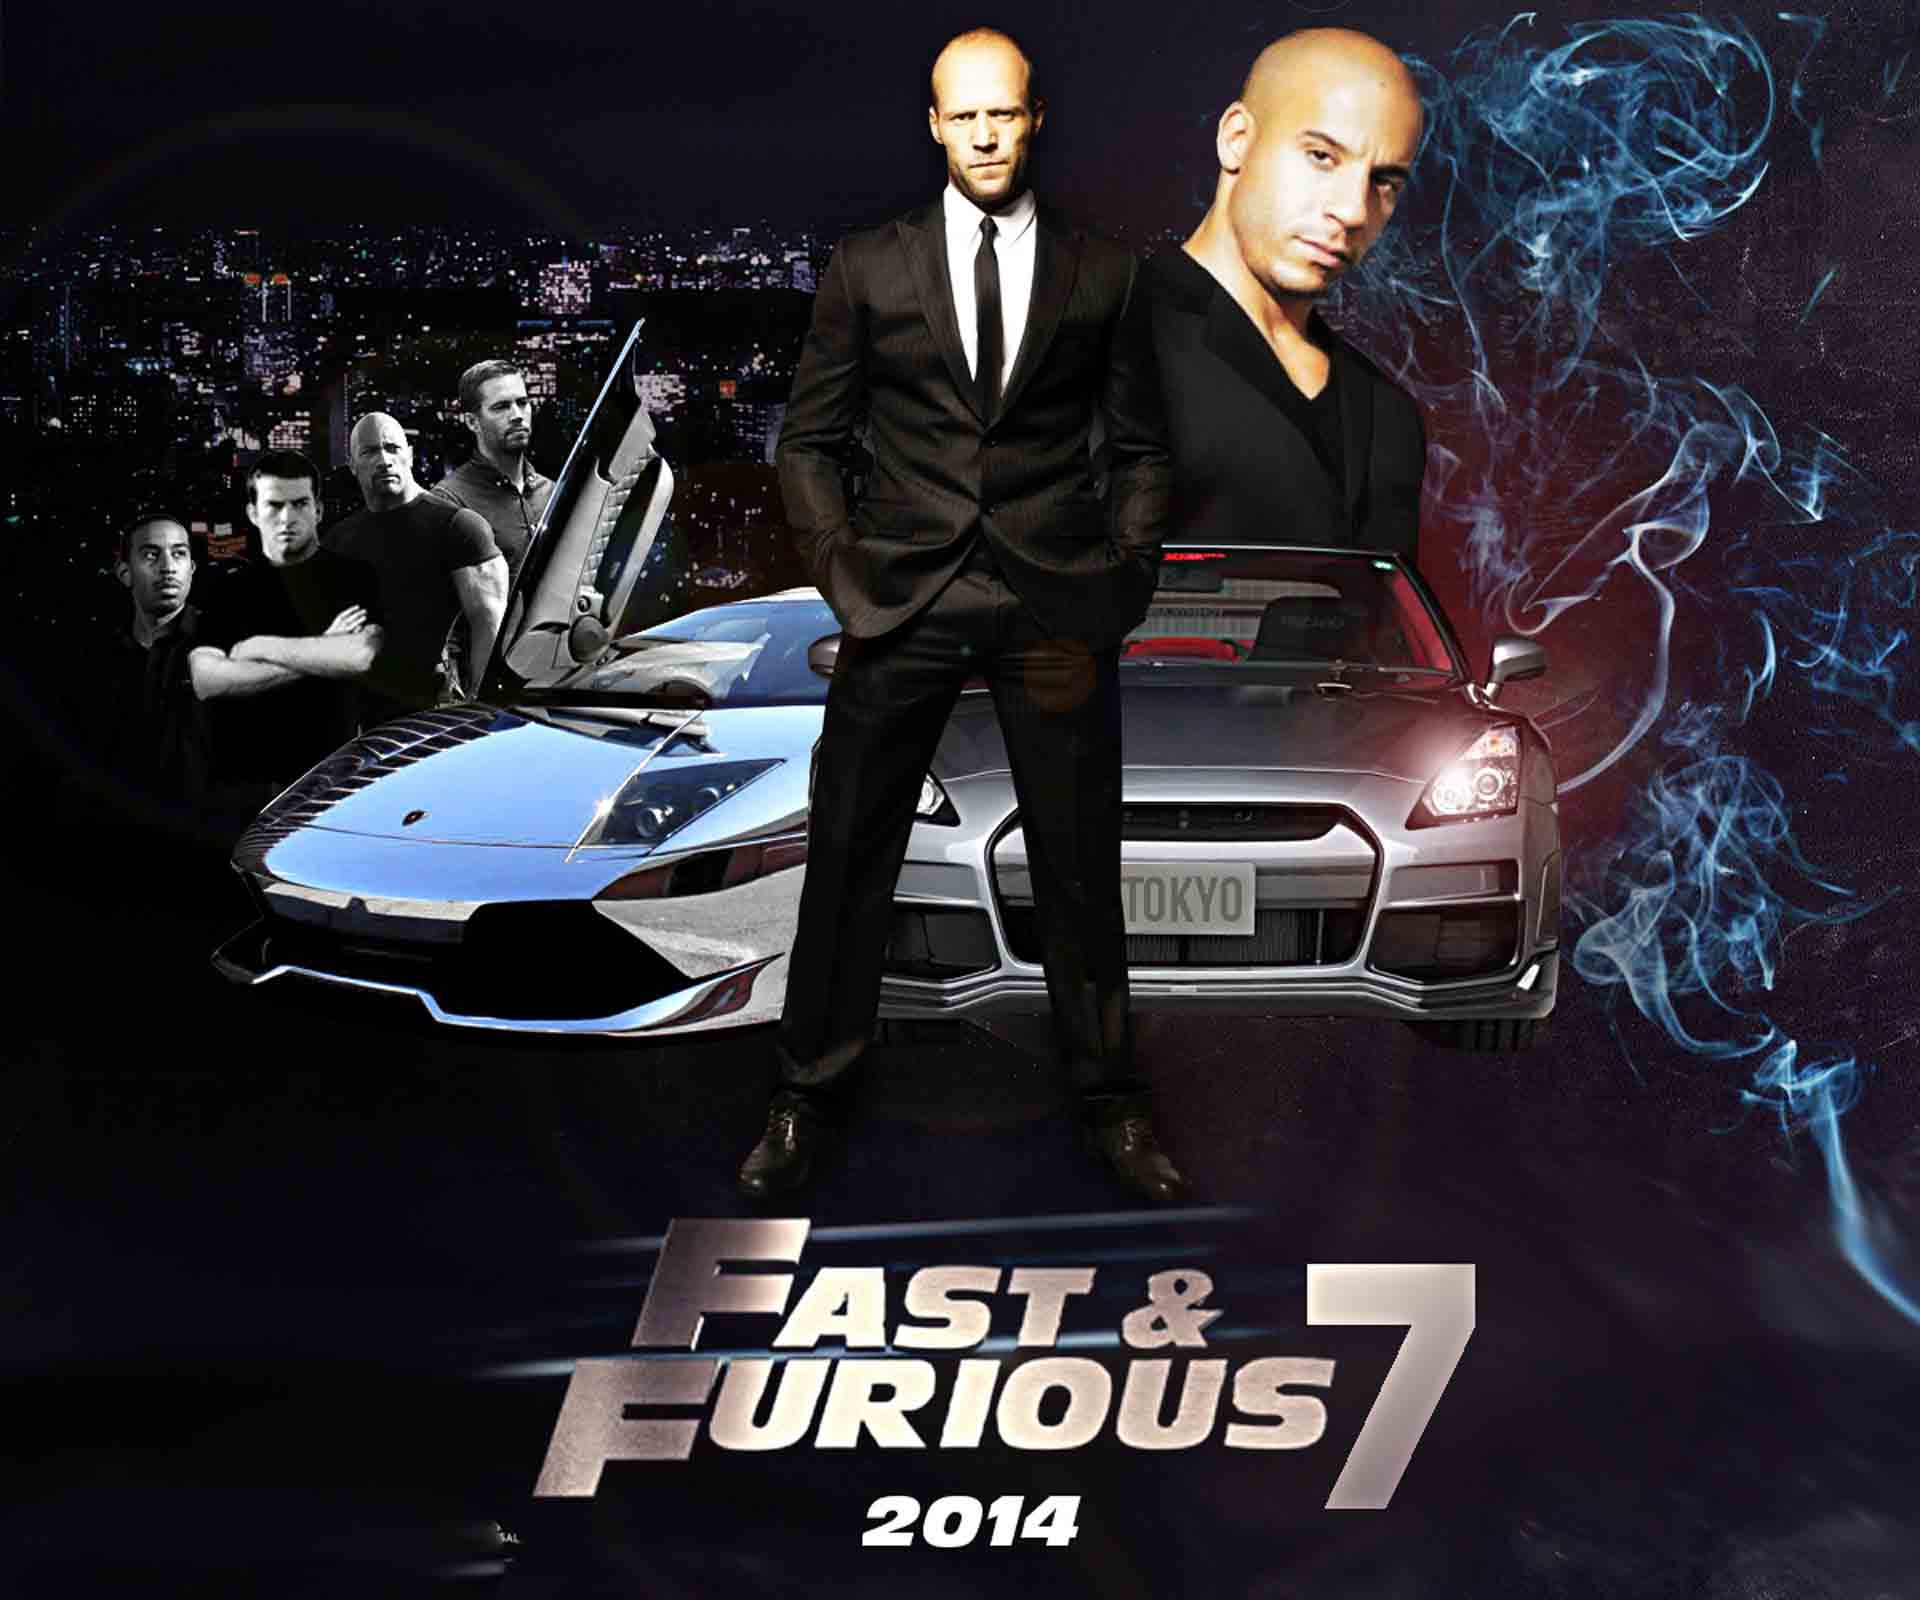 1920x1600 Fast and furious 5 wallpaper Group (70+)